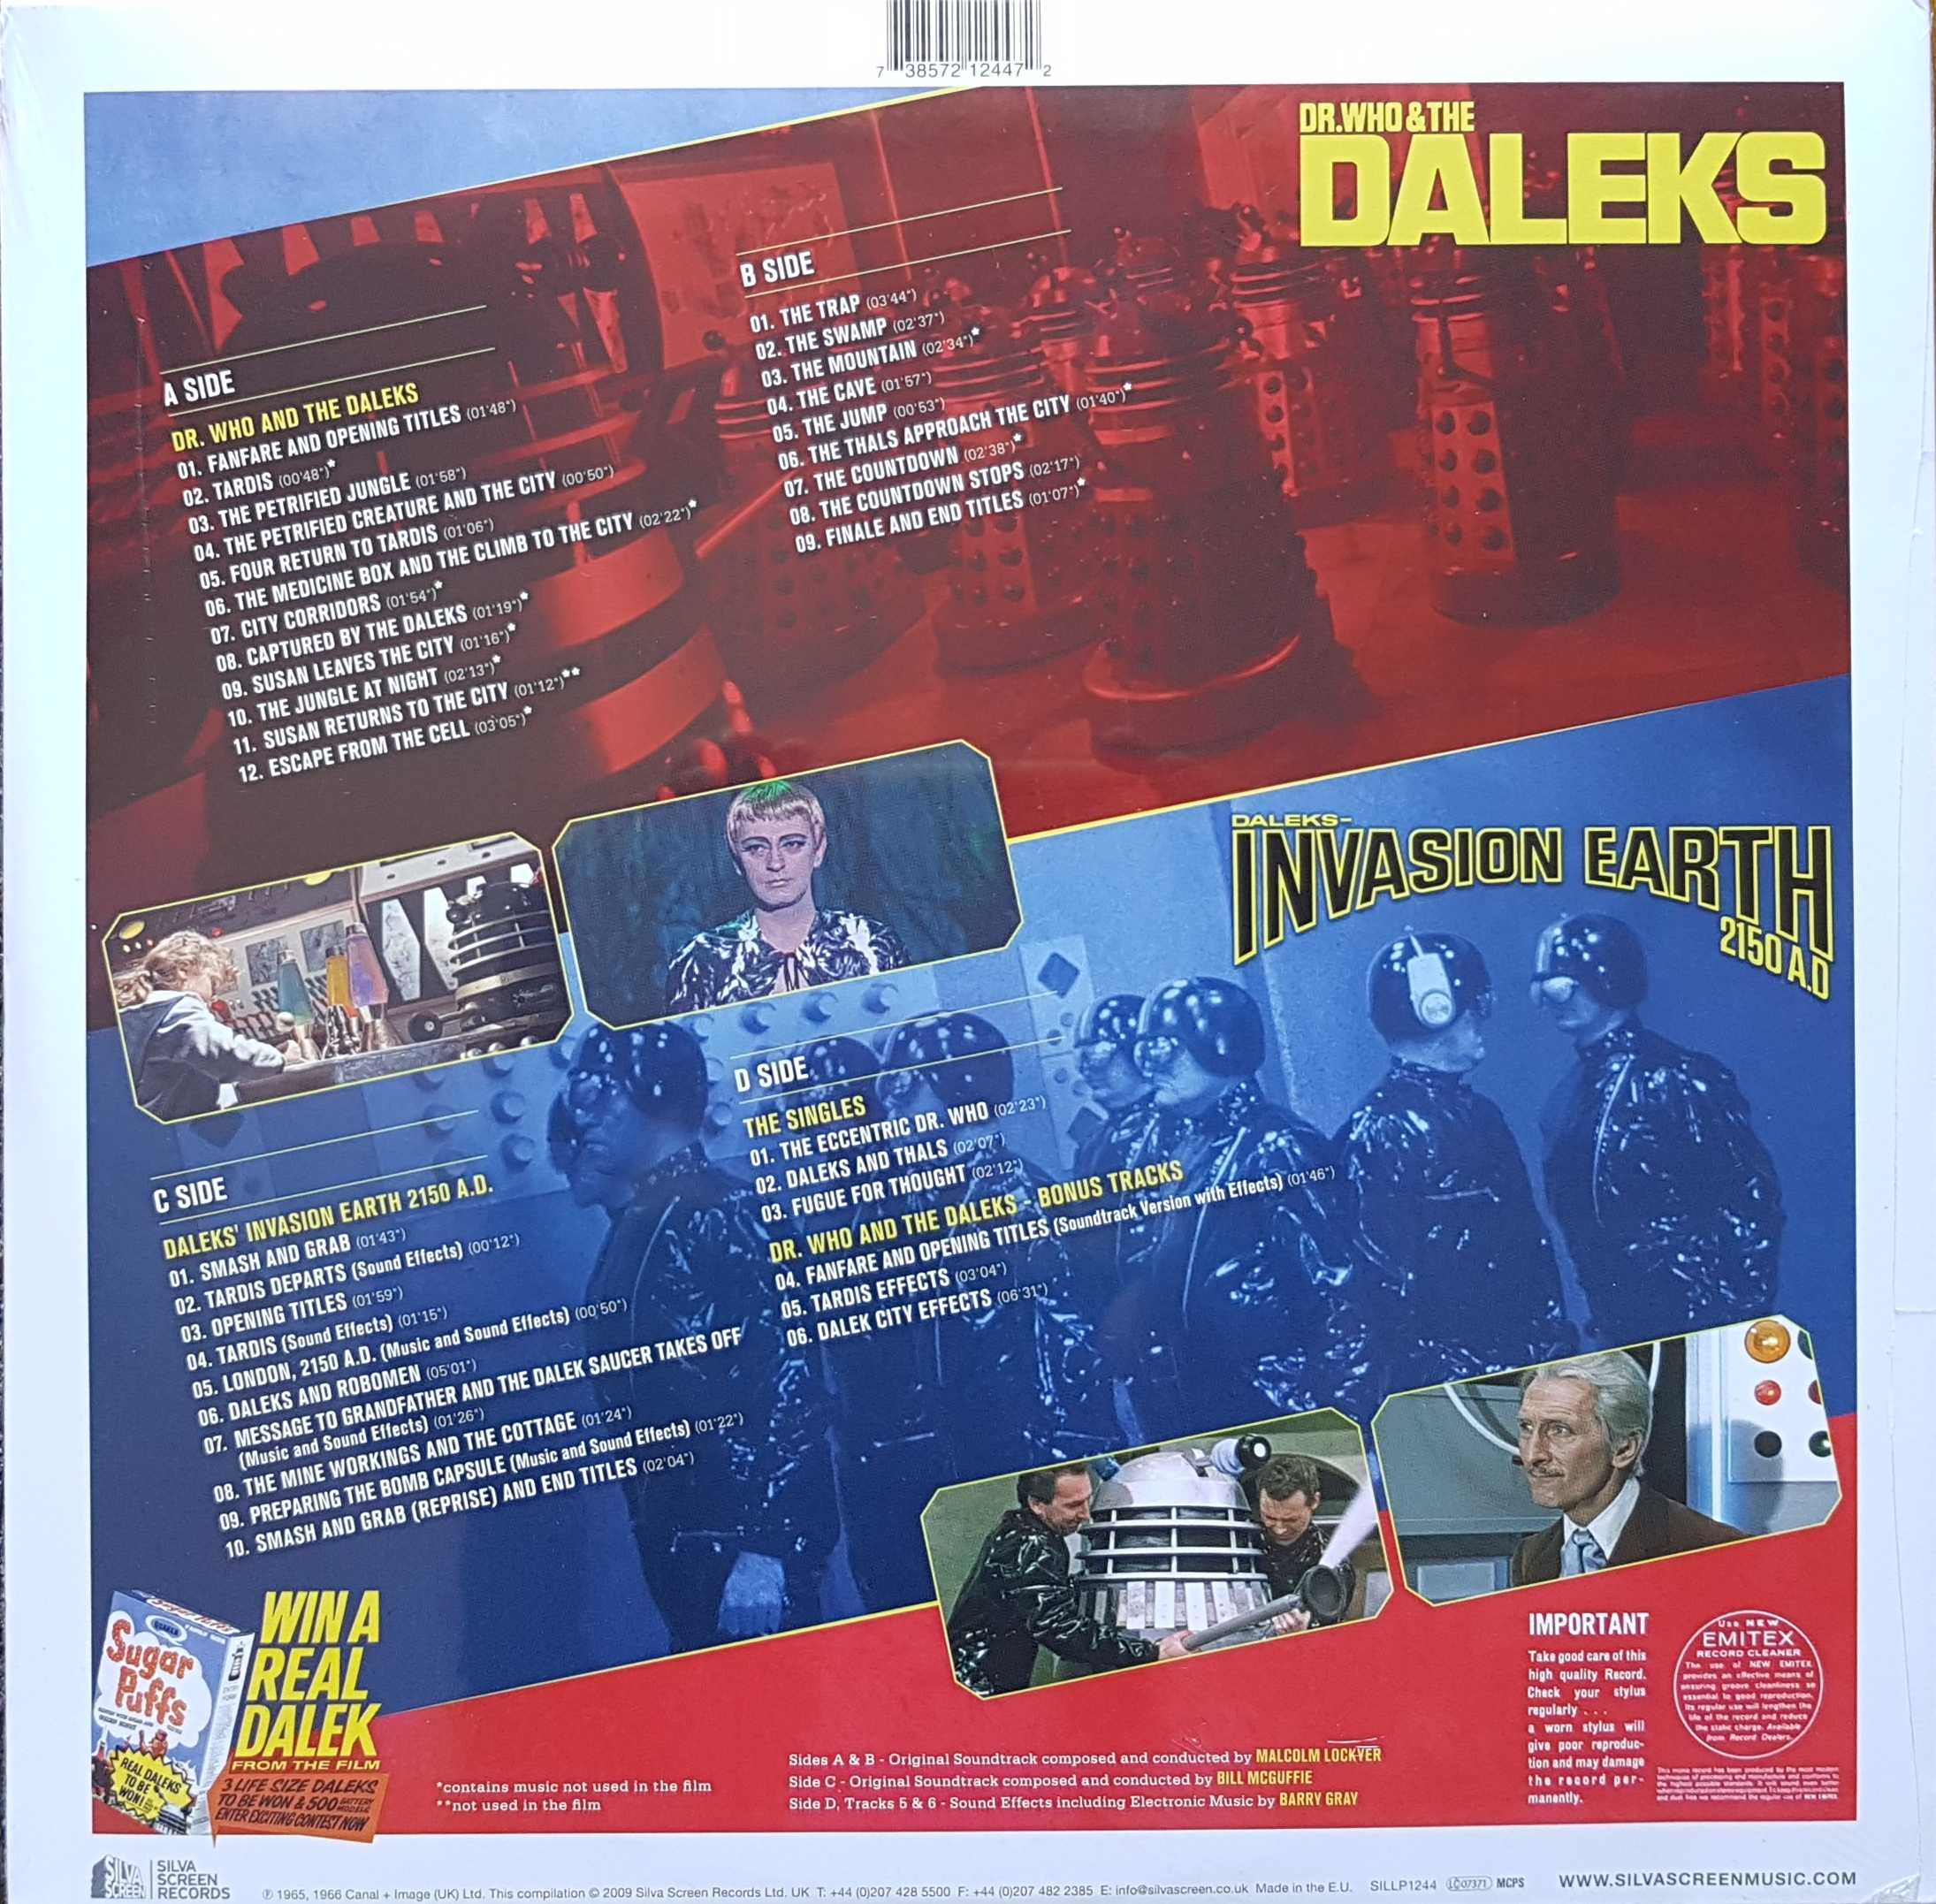 Picture of SILLP 1244 Doctor Who and the Daleks / Daleks invasion Earth 2150 AD - Record Store Day 2016 by artist Malcolm Lockyer / Bill McGuffie / Barry Gray from the BBC records and Tapes library